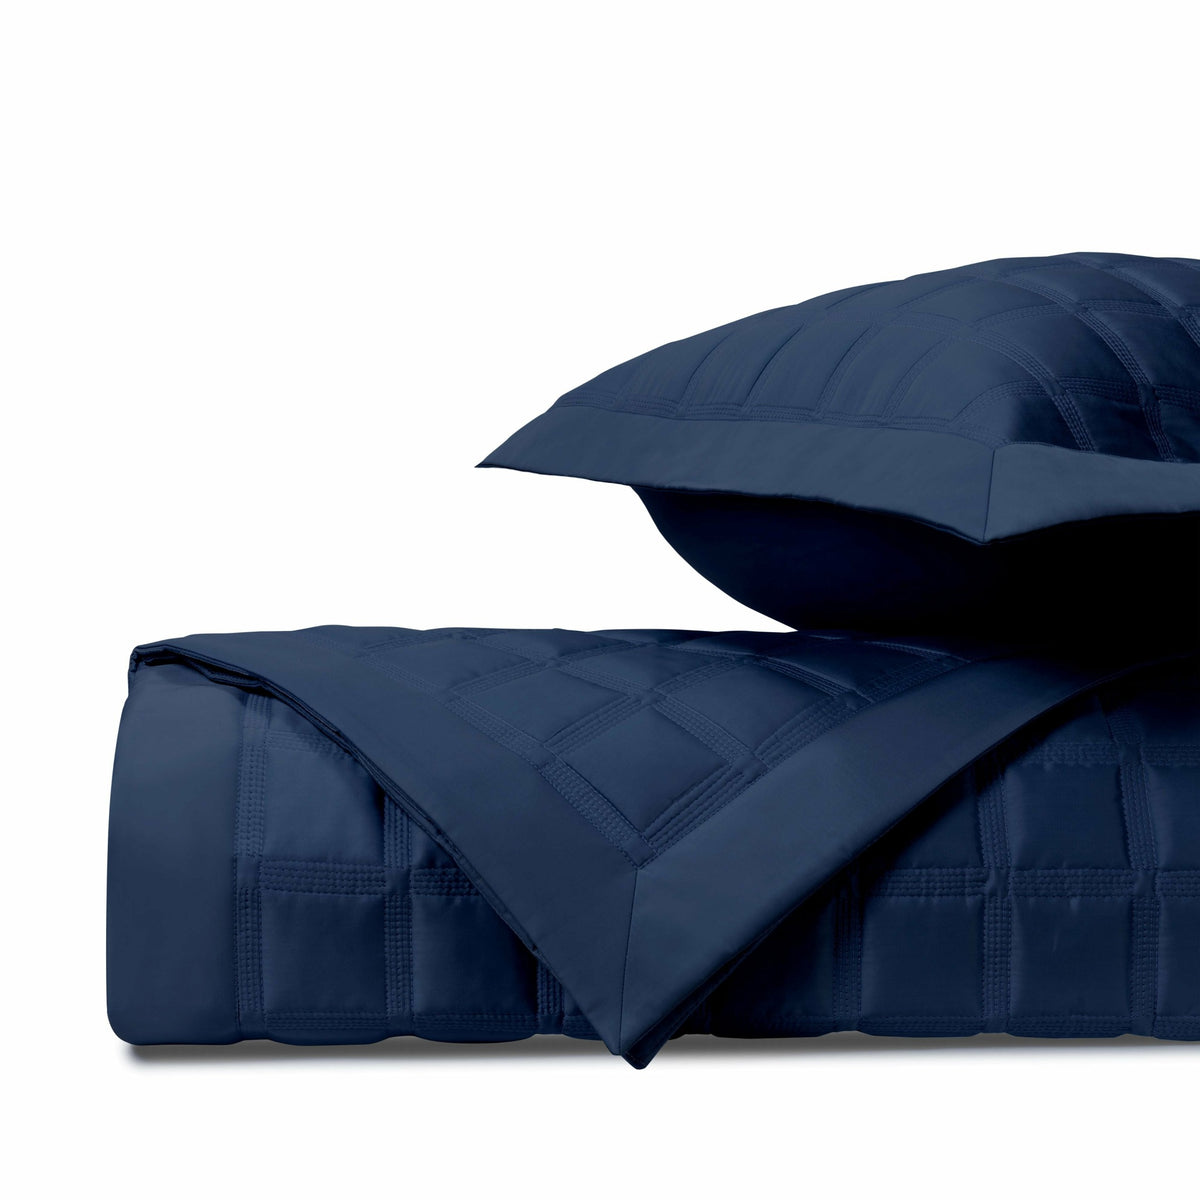 Home Treasures Athens Quilted Bedding Fine Linens Navy Blue